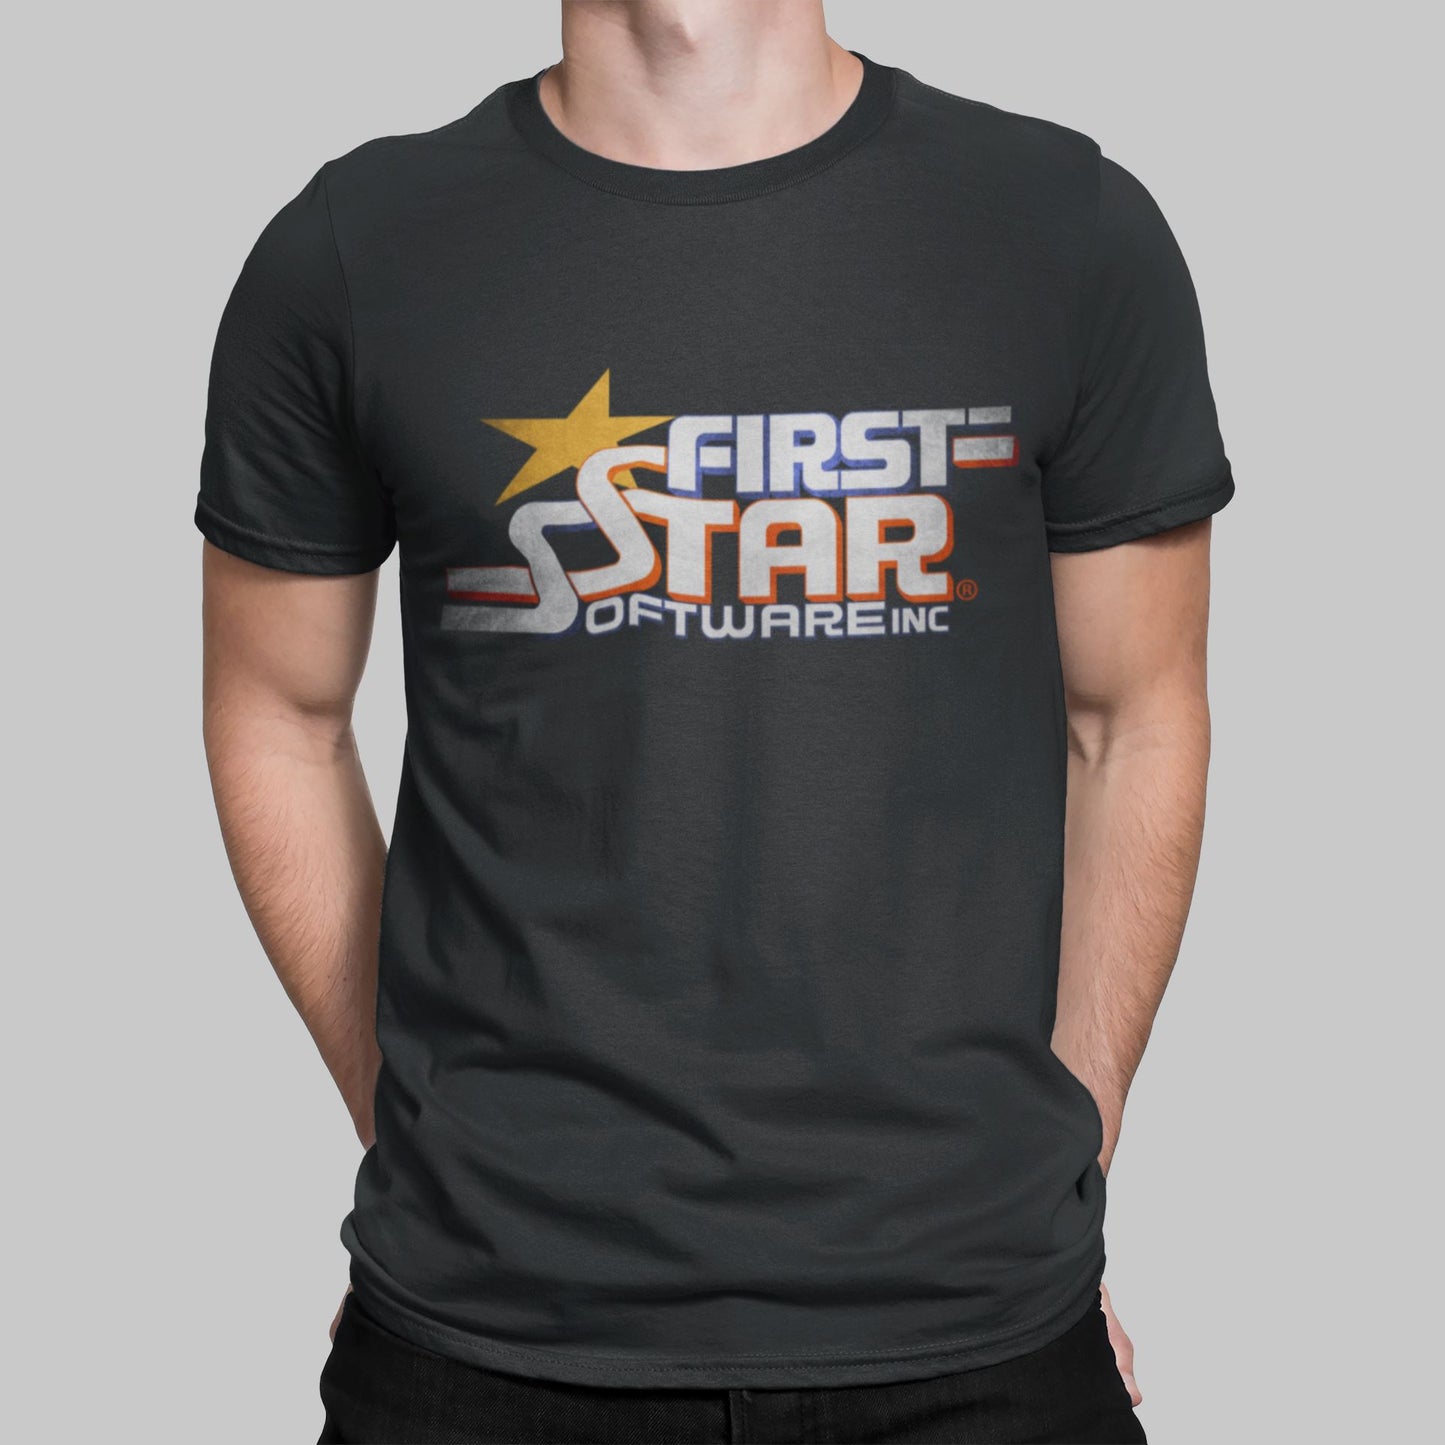 First Star Software Retro Gaming T-Shirt T-Shirt Seven Squared Small 34-36" Black 